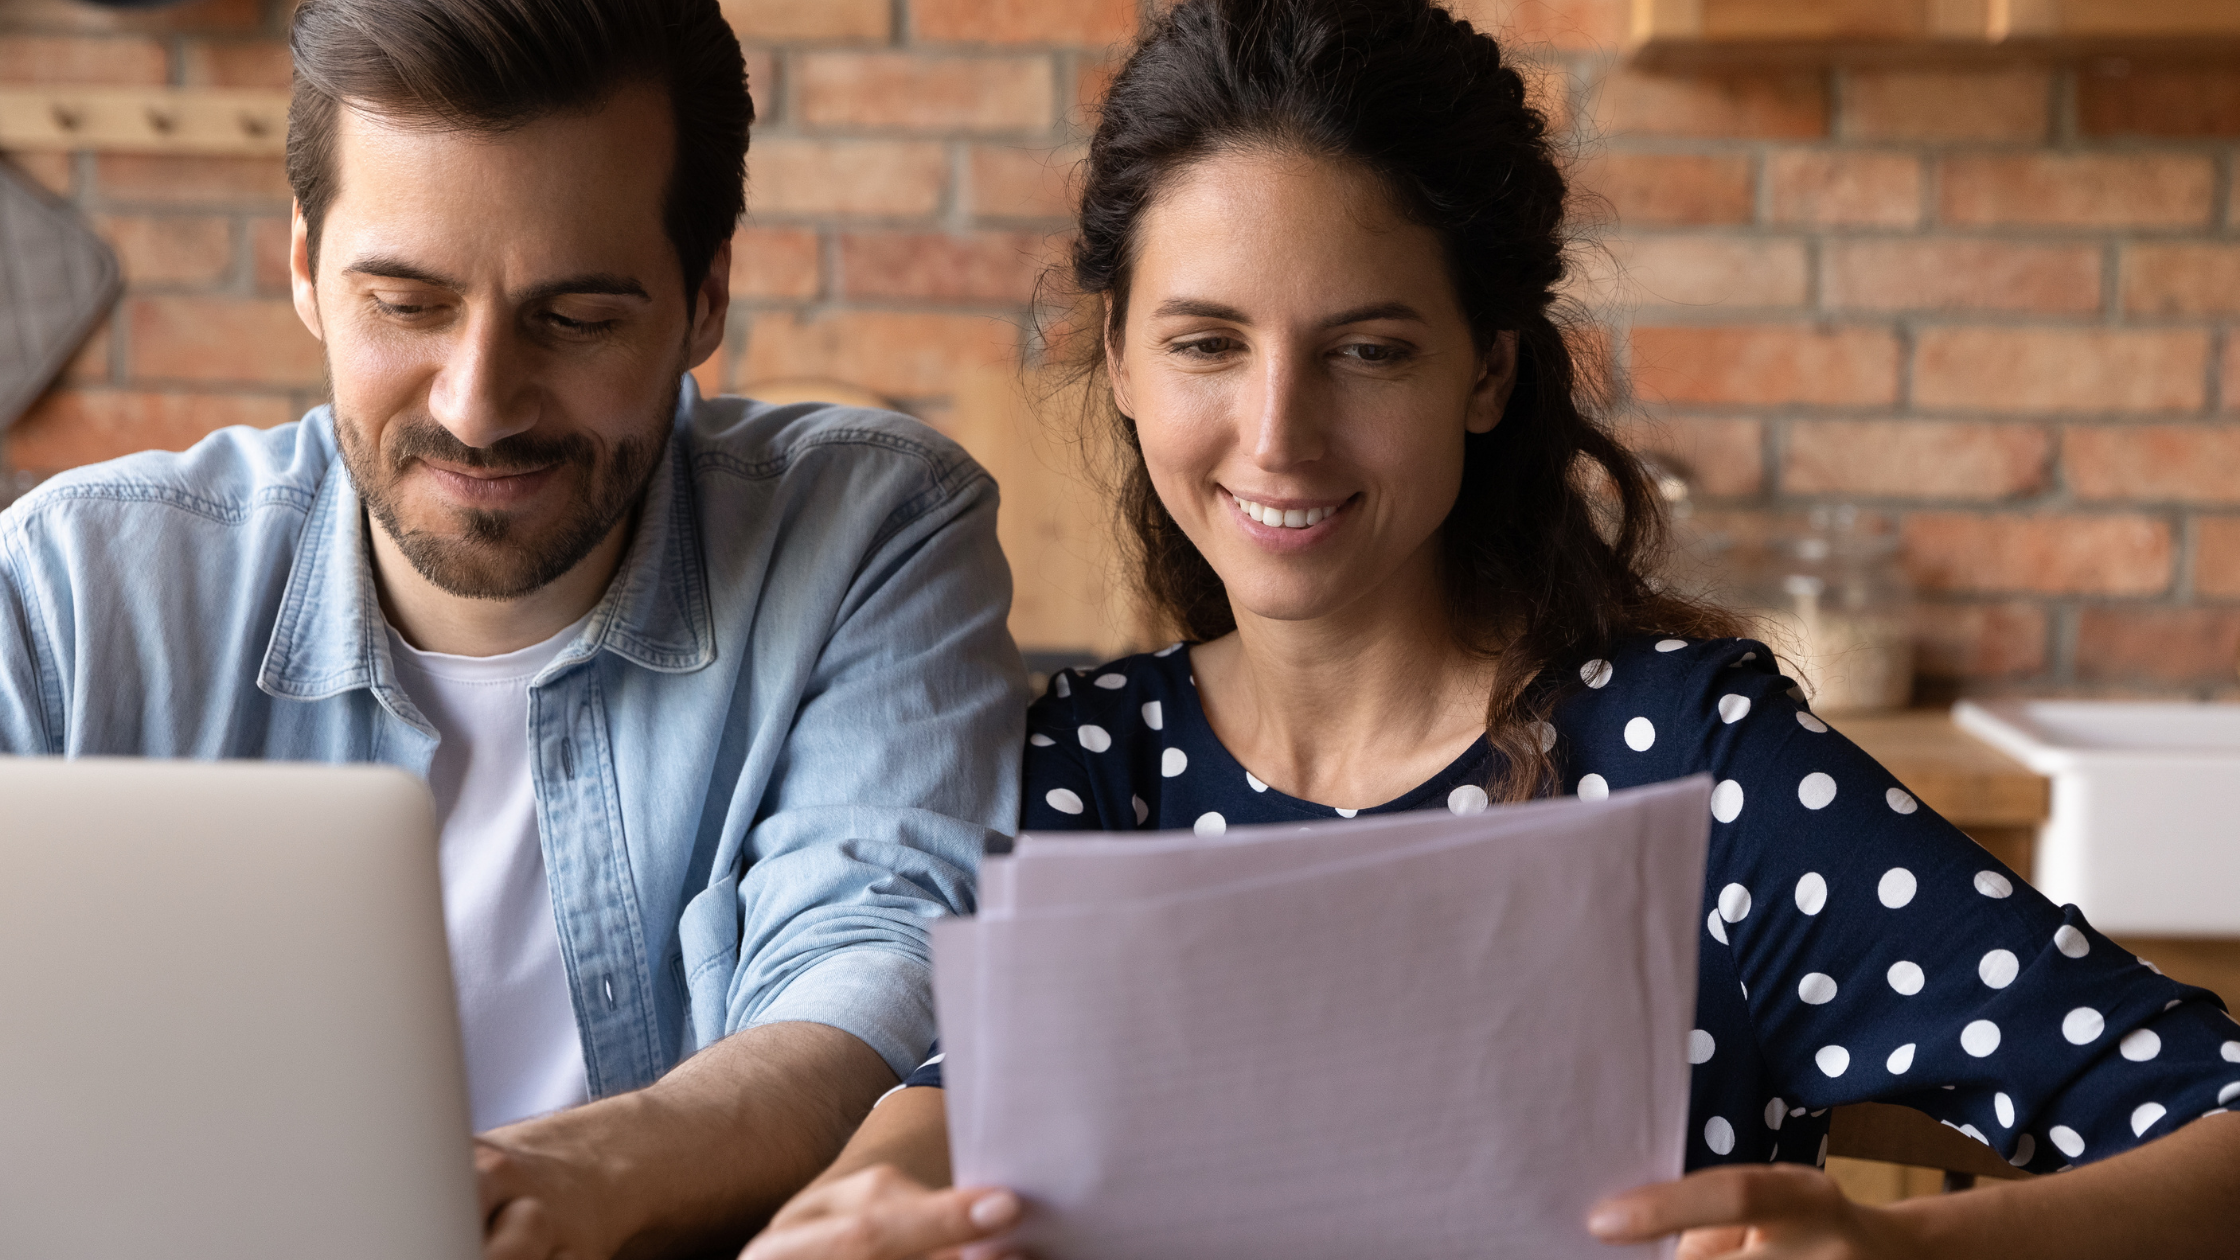 Does My Spouse's Credit Affect Me Buying a Home